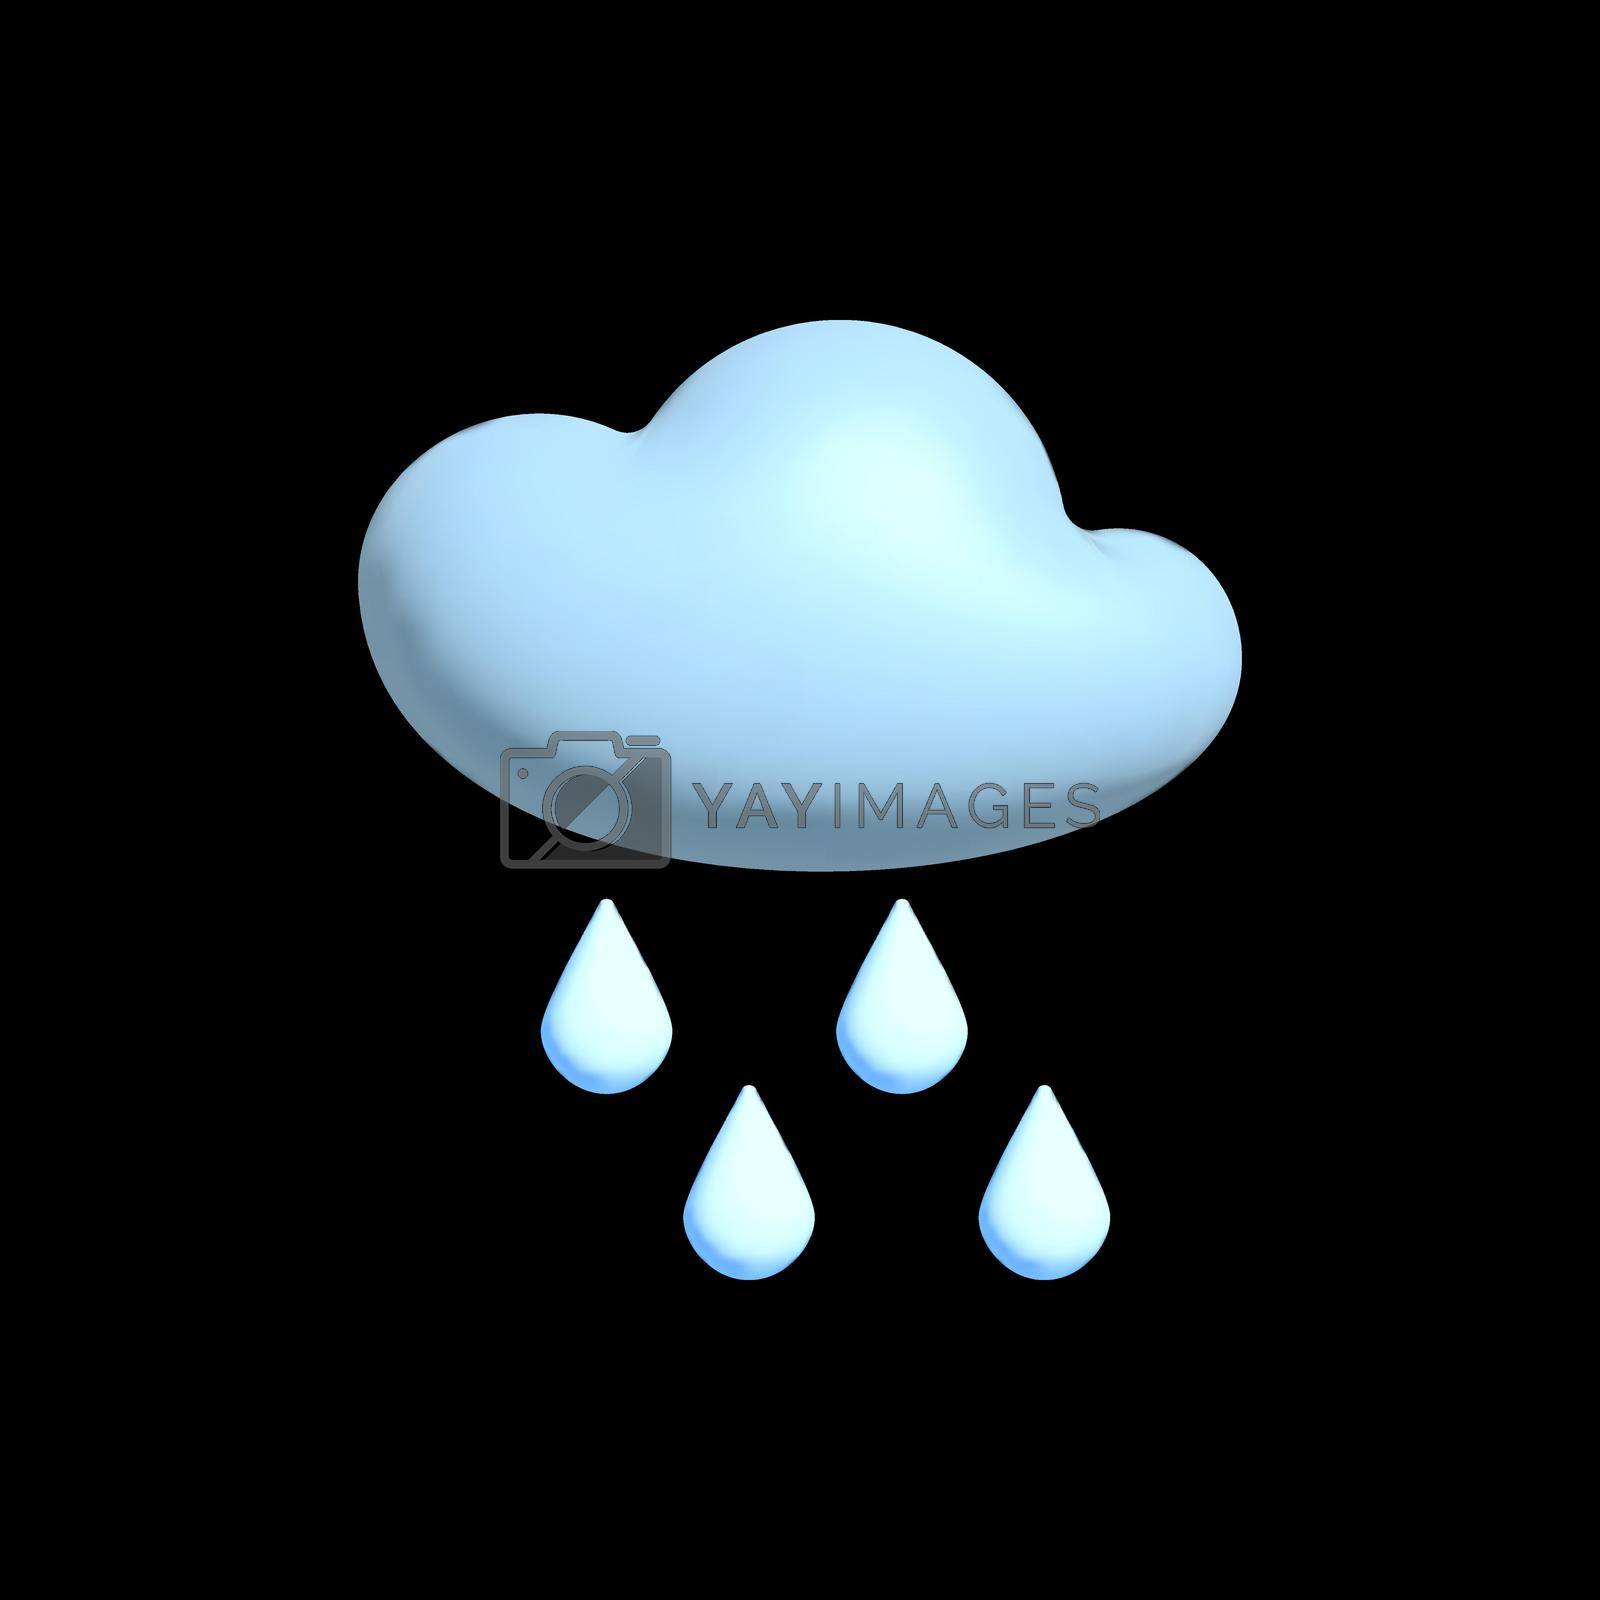 Royalty free image of 3d weather icon for apps and social media by MariaTem